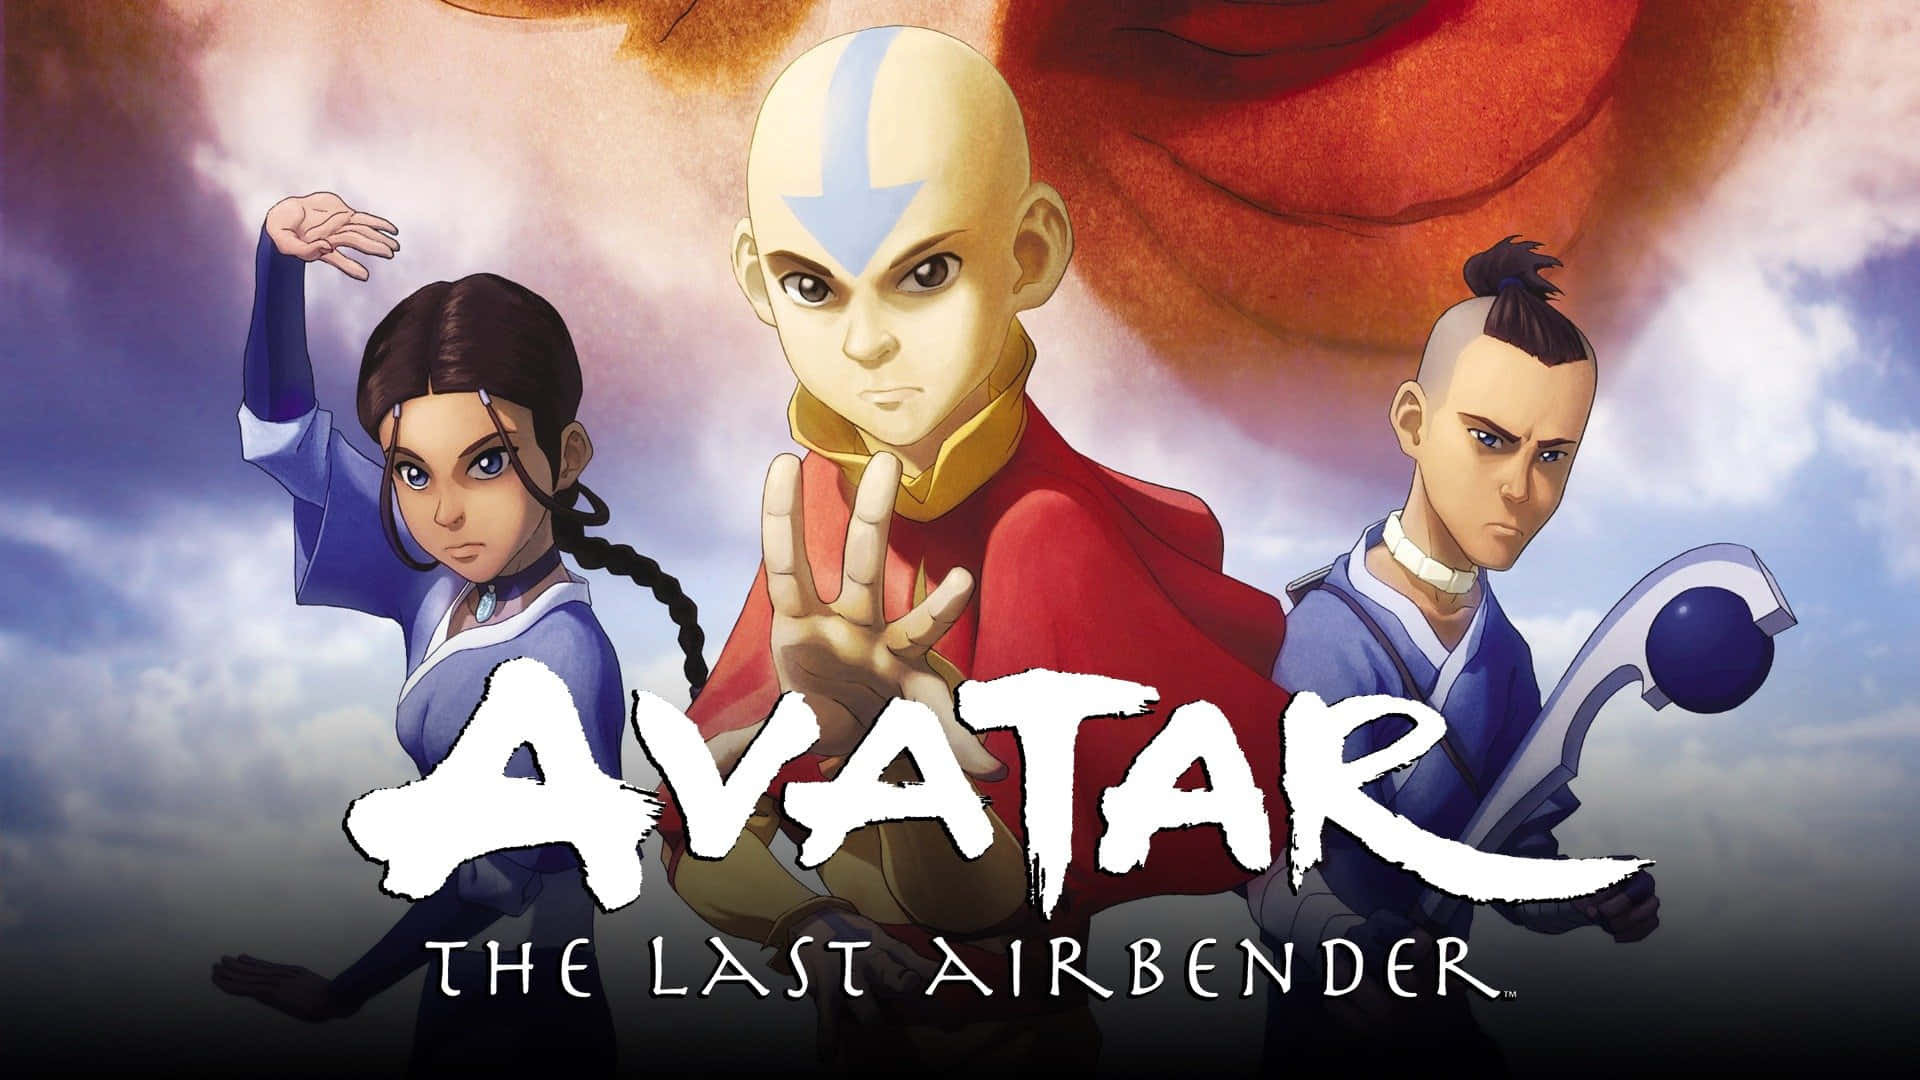 Best of Avatar the last airbender photos